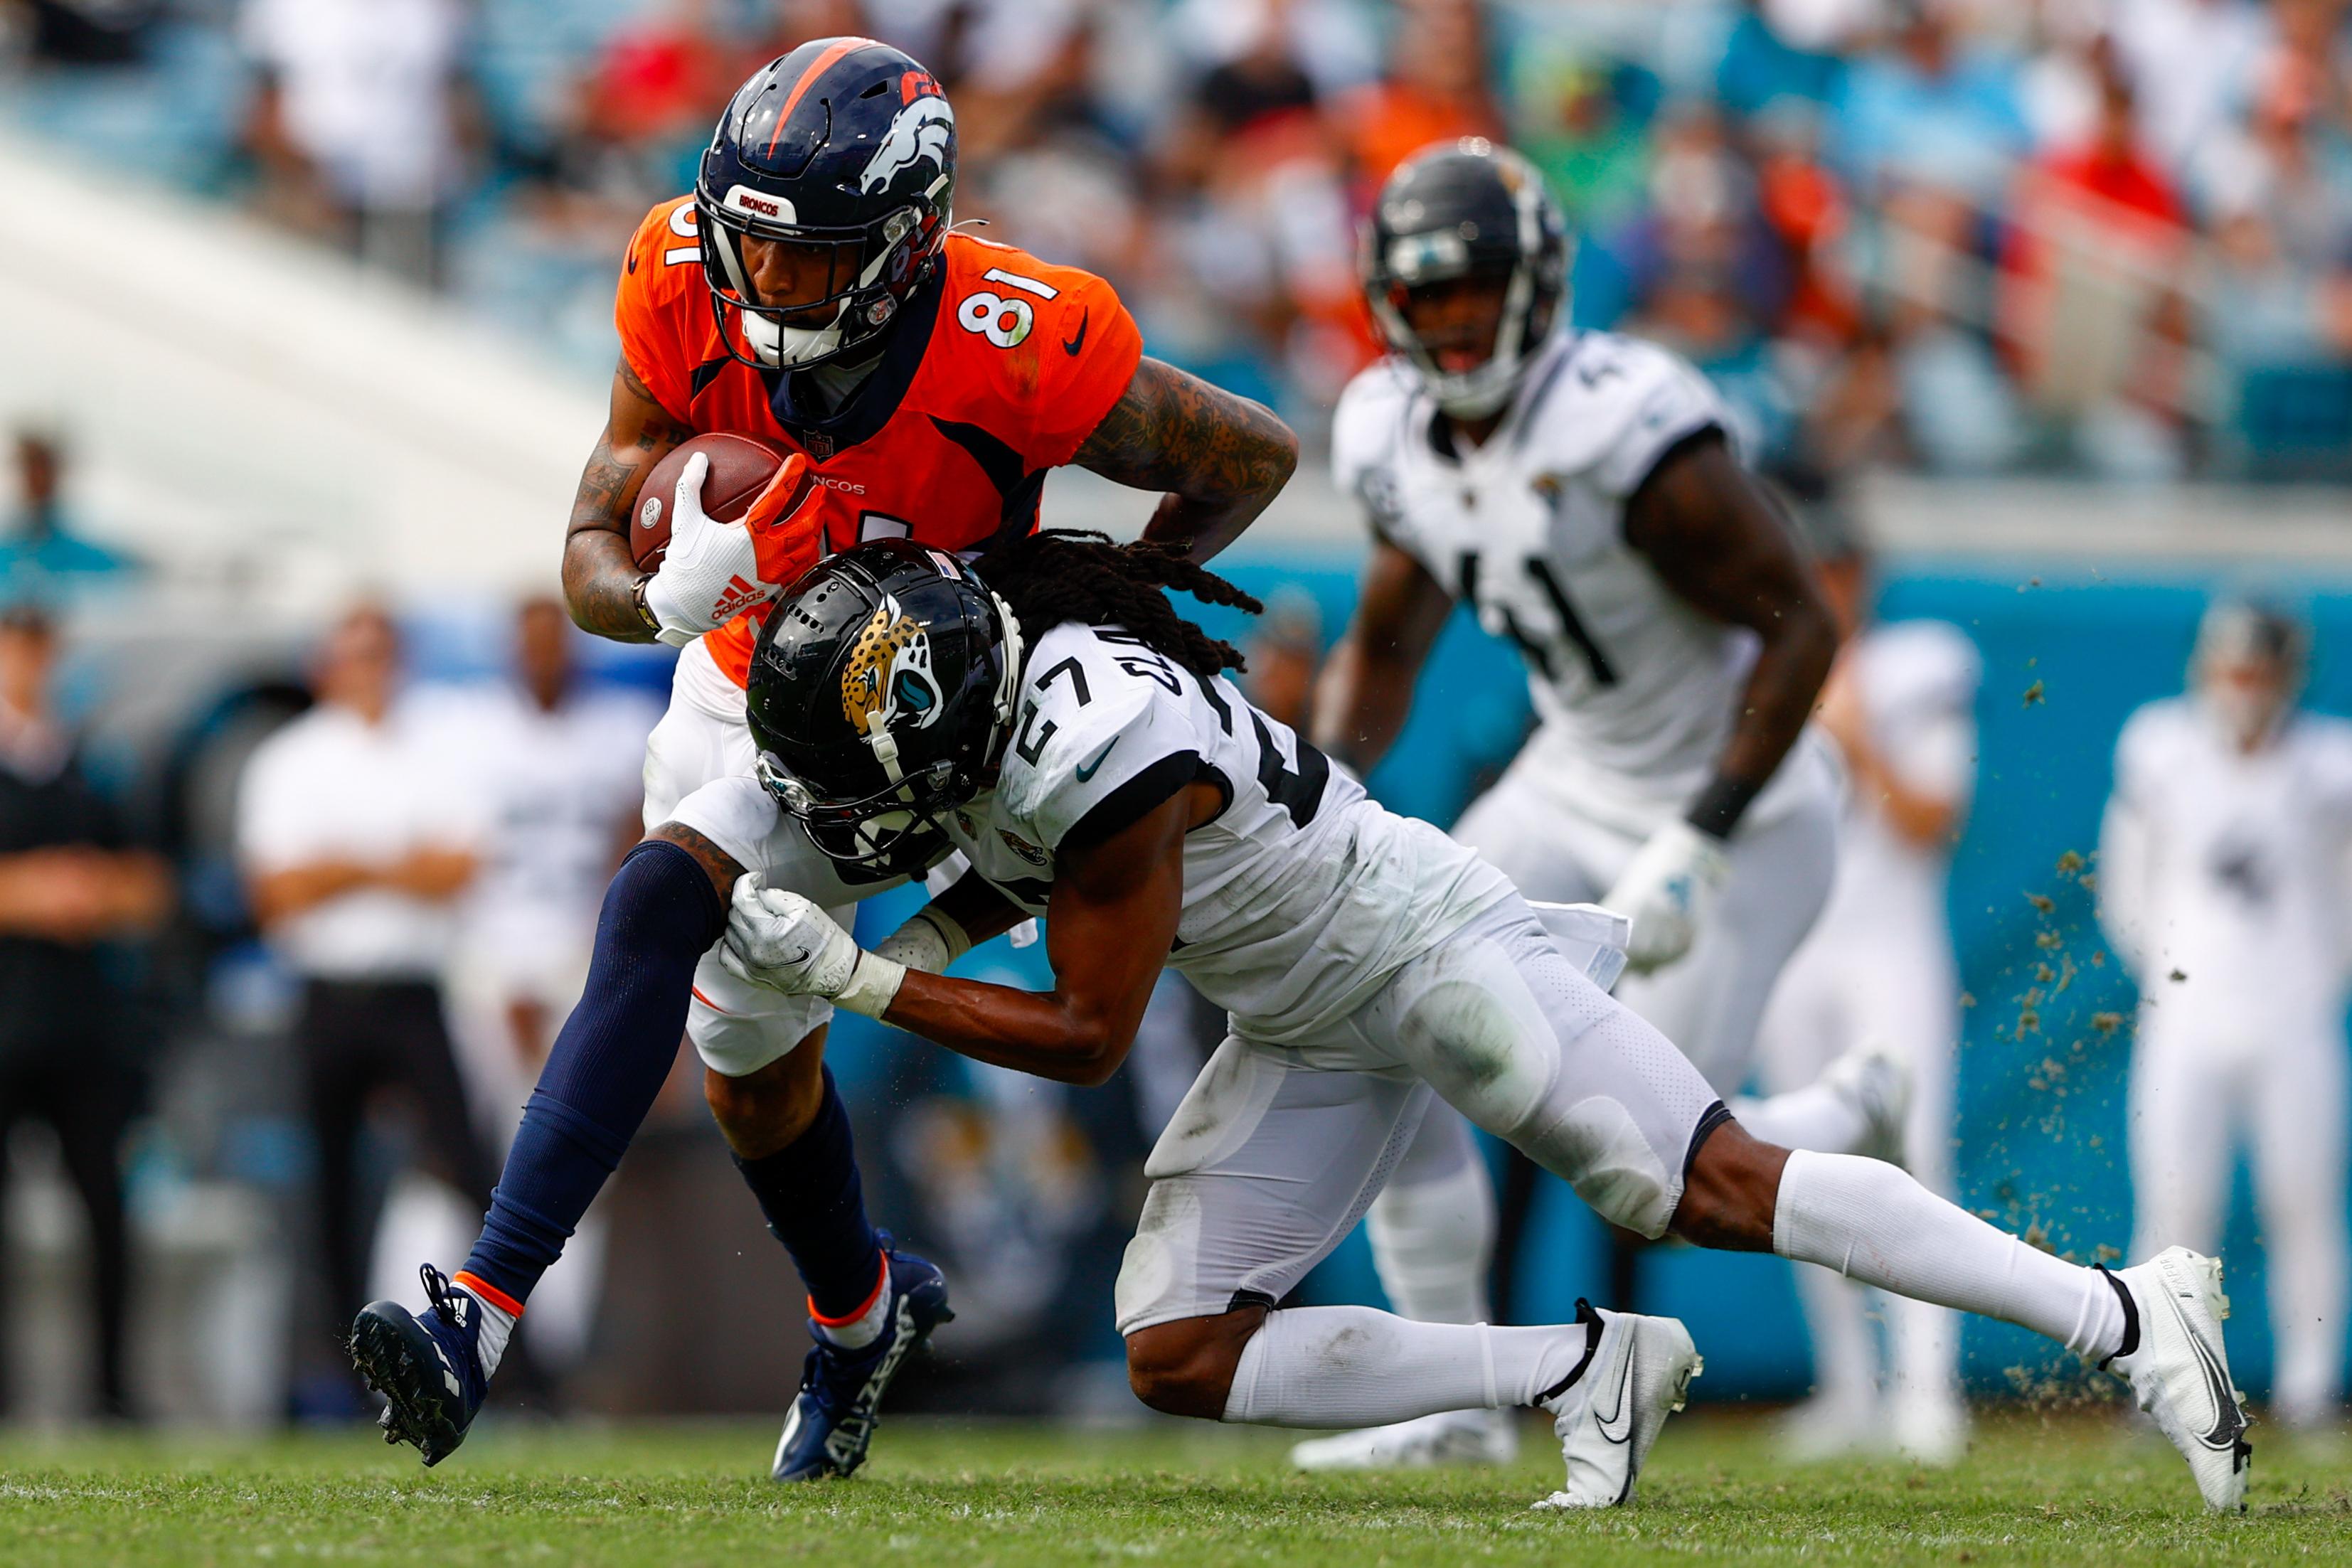 Denver Broncos wide receiver Tim Patrick (81) is tackled by Jacksonville Jaguars cornerback Chris Claybrooks (27) in the fourth quarter at TIAA Bank Field.